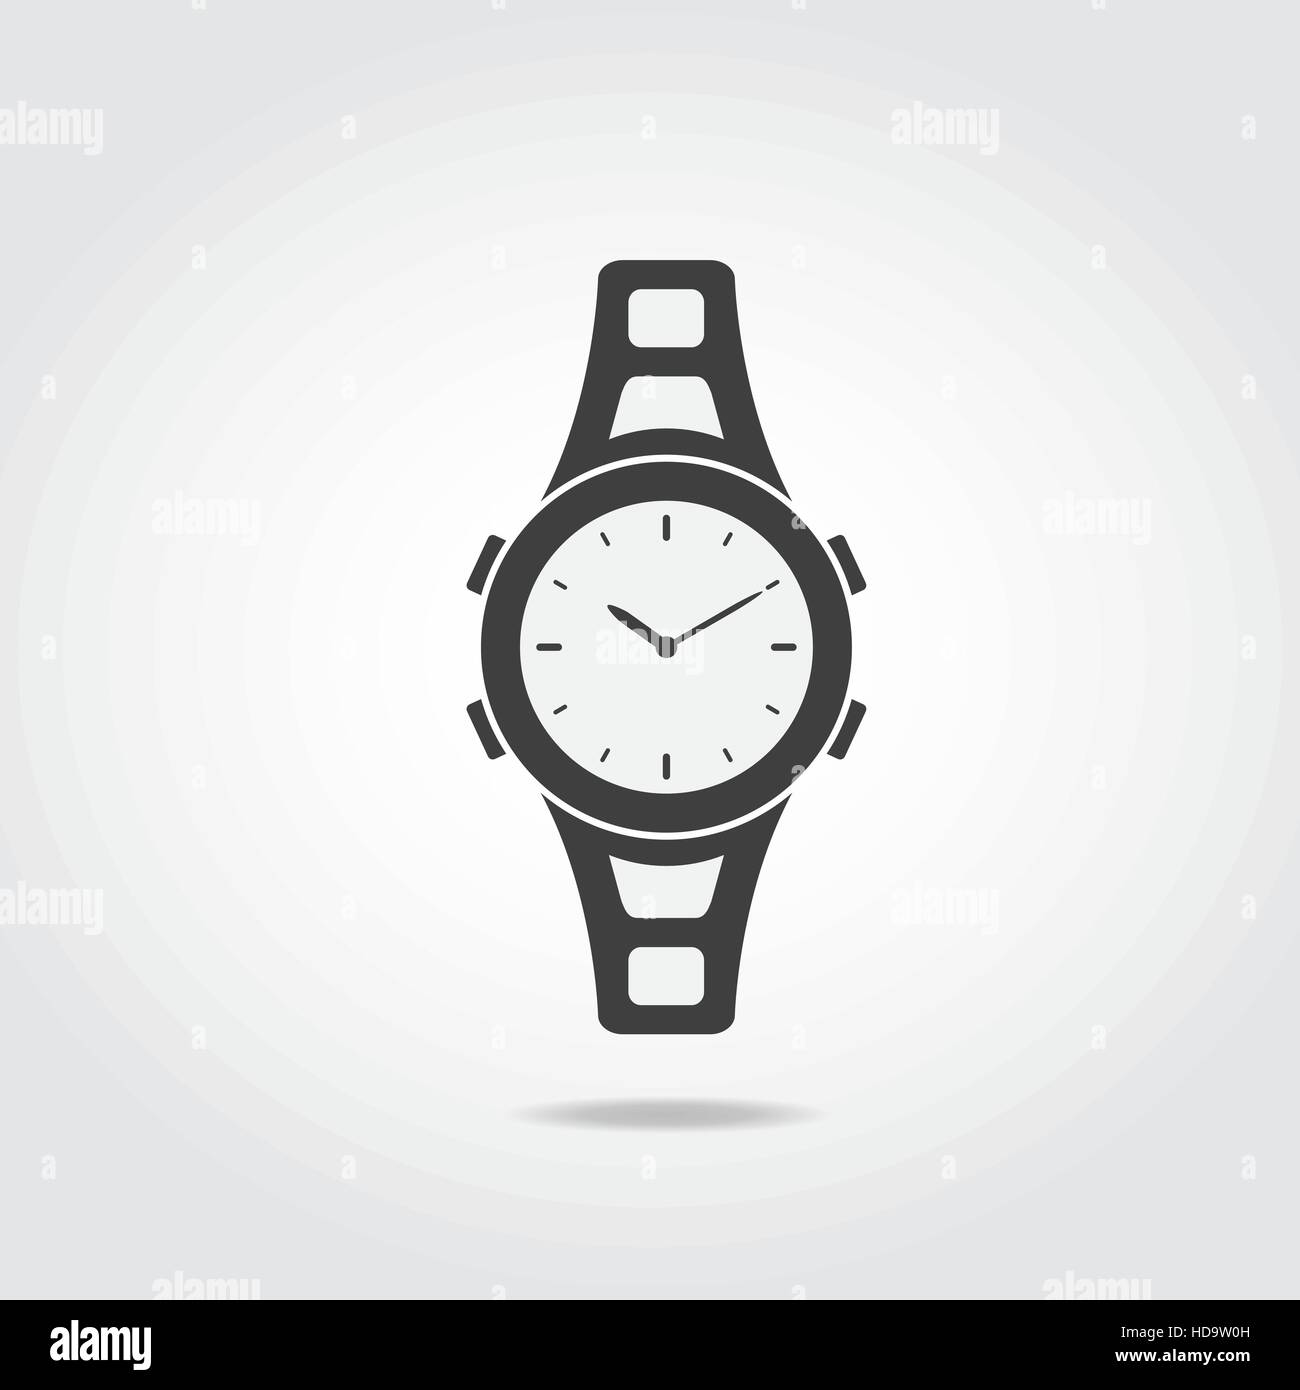 Sport watch icon. Water resistant mechanical watch for sport and activity. Stock Vector